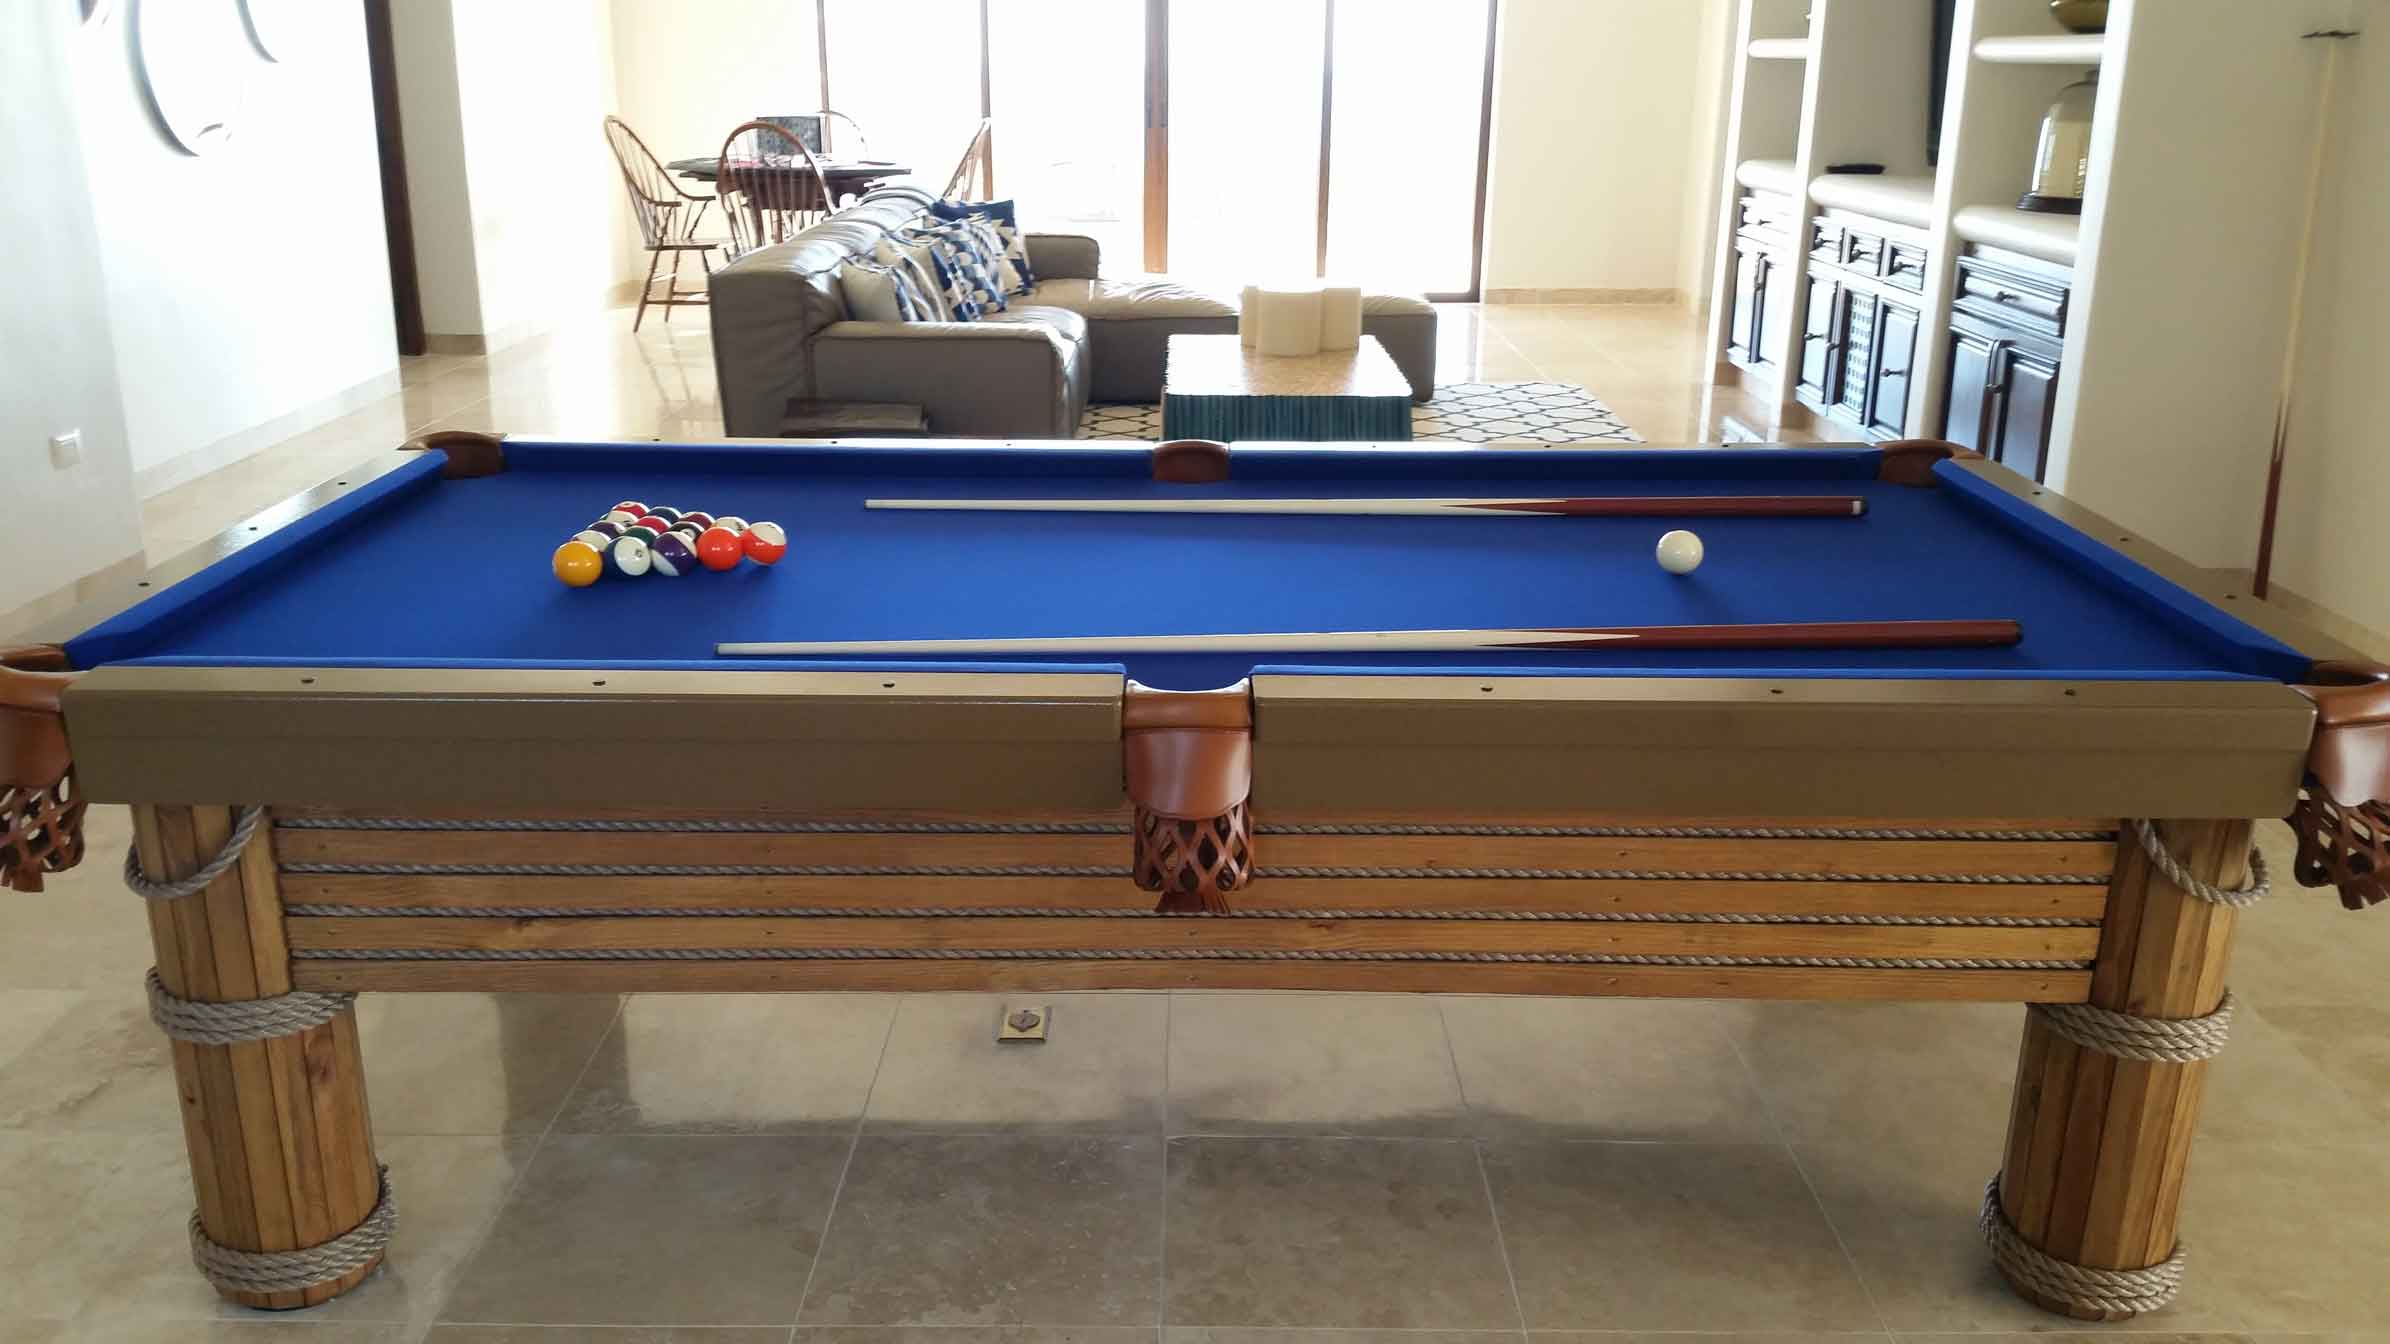 R&R Outdoors Caribbean pool table made for a client in Cabo San Lucas, Mexico